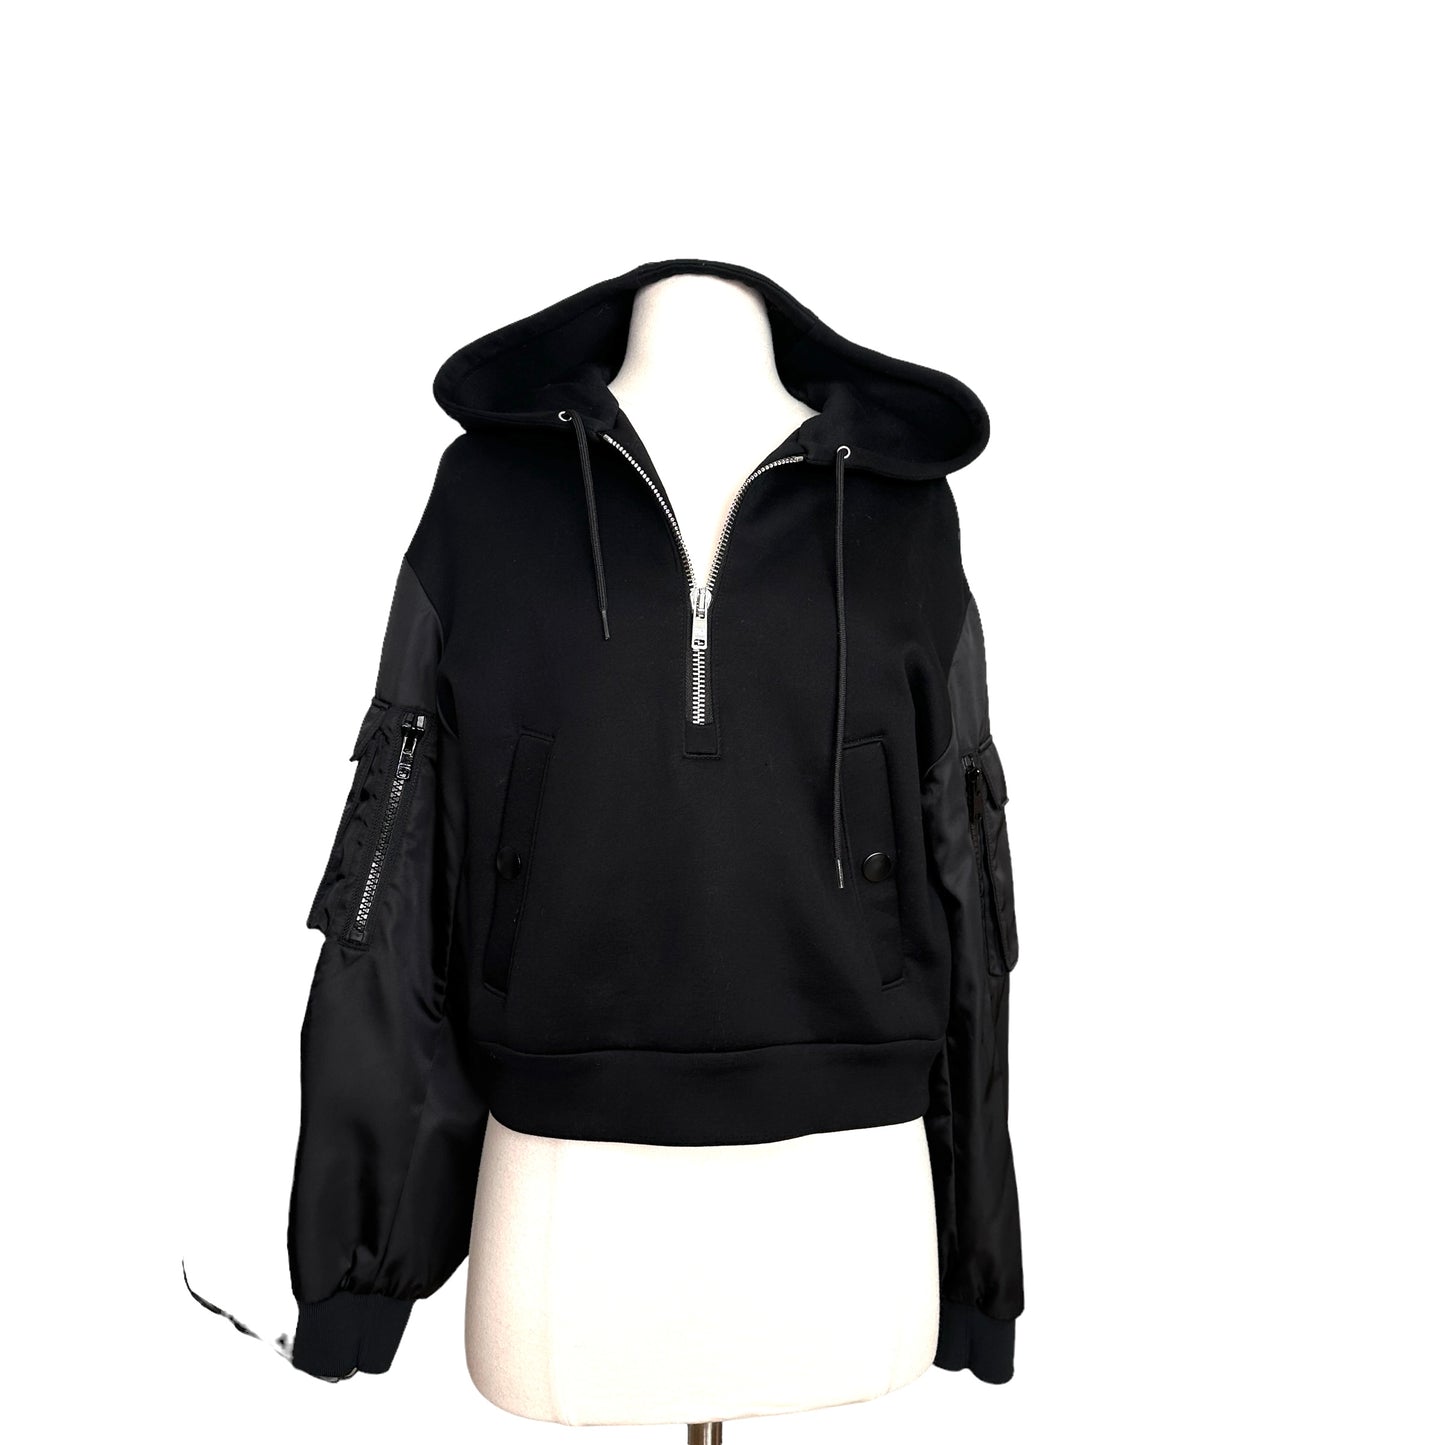 Hooded Sweater/Jacket - S